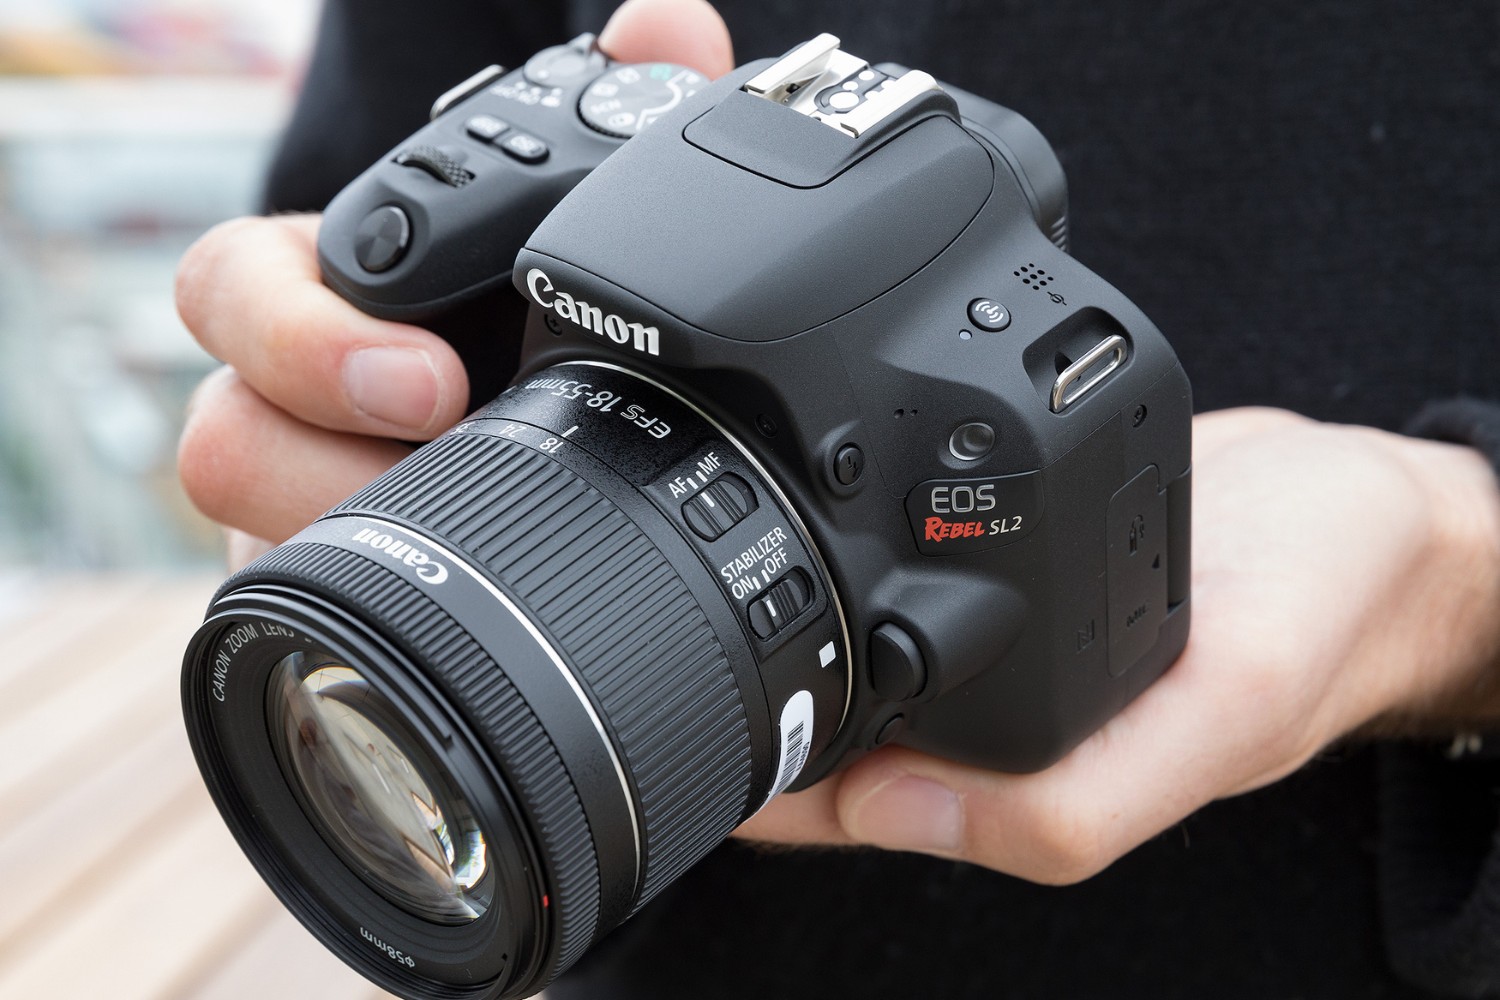 What Year Did The Canon EOS Rebel SL2 DSLR Camera Come Out